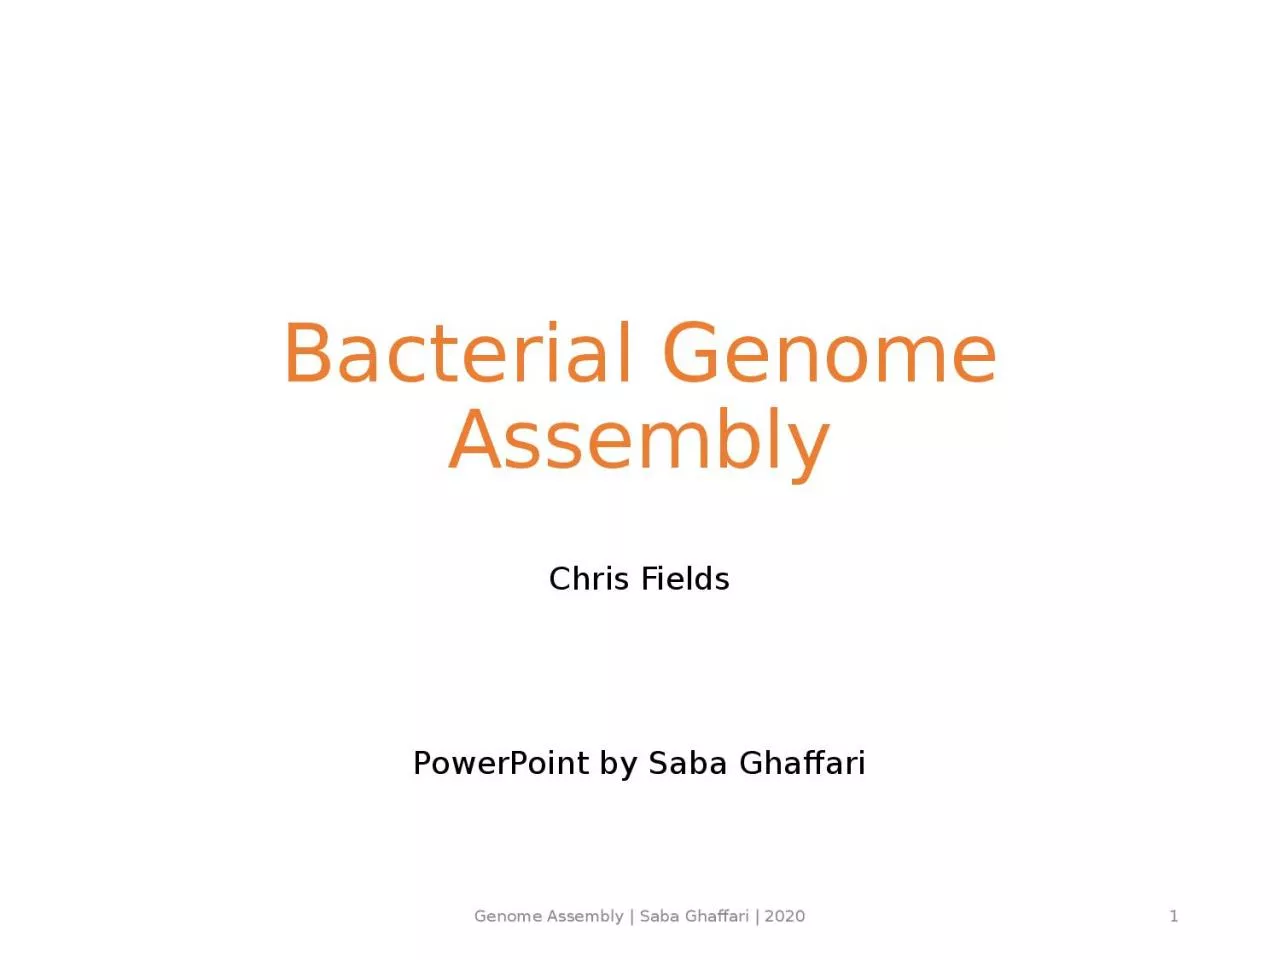 Bacterial Genome Assembly